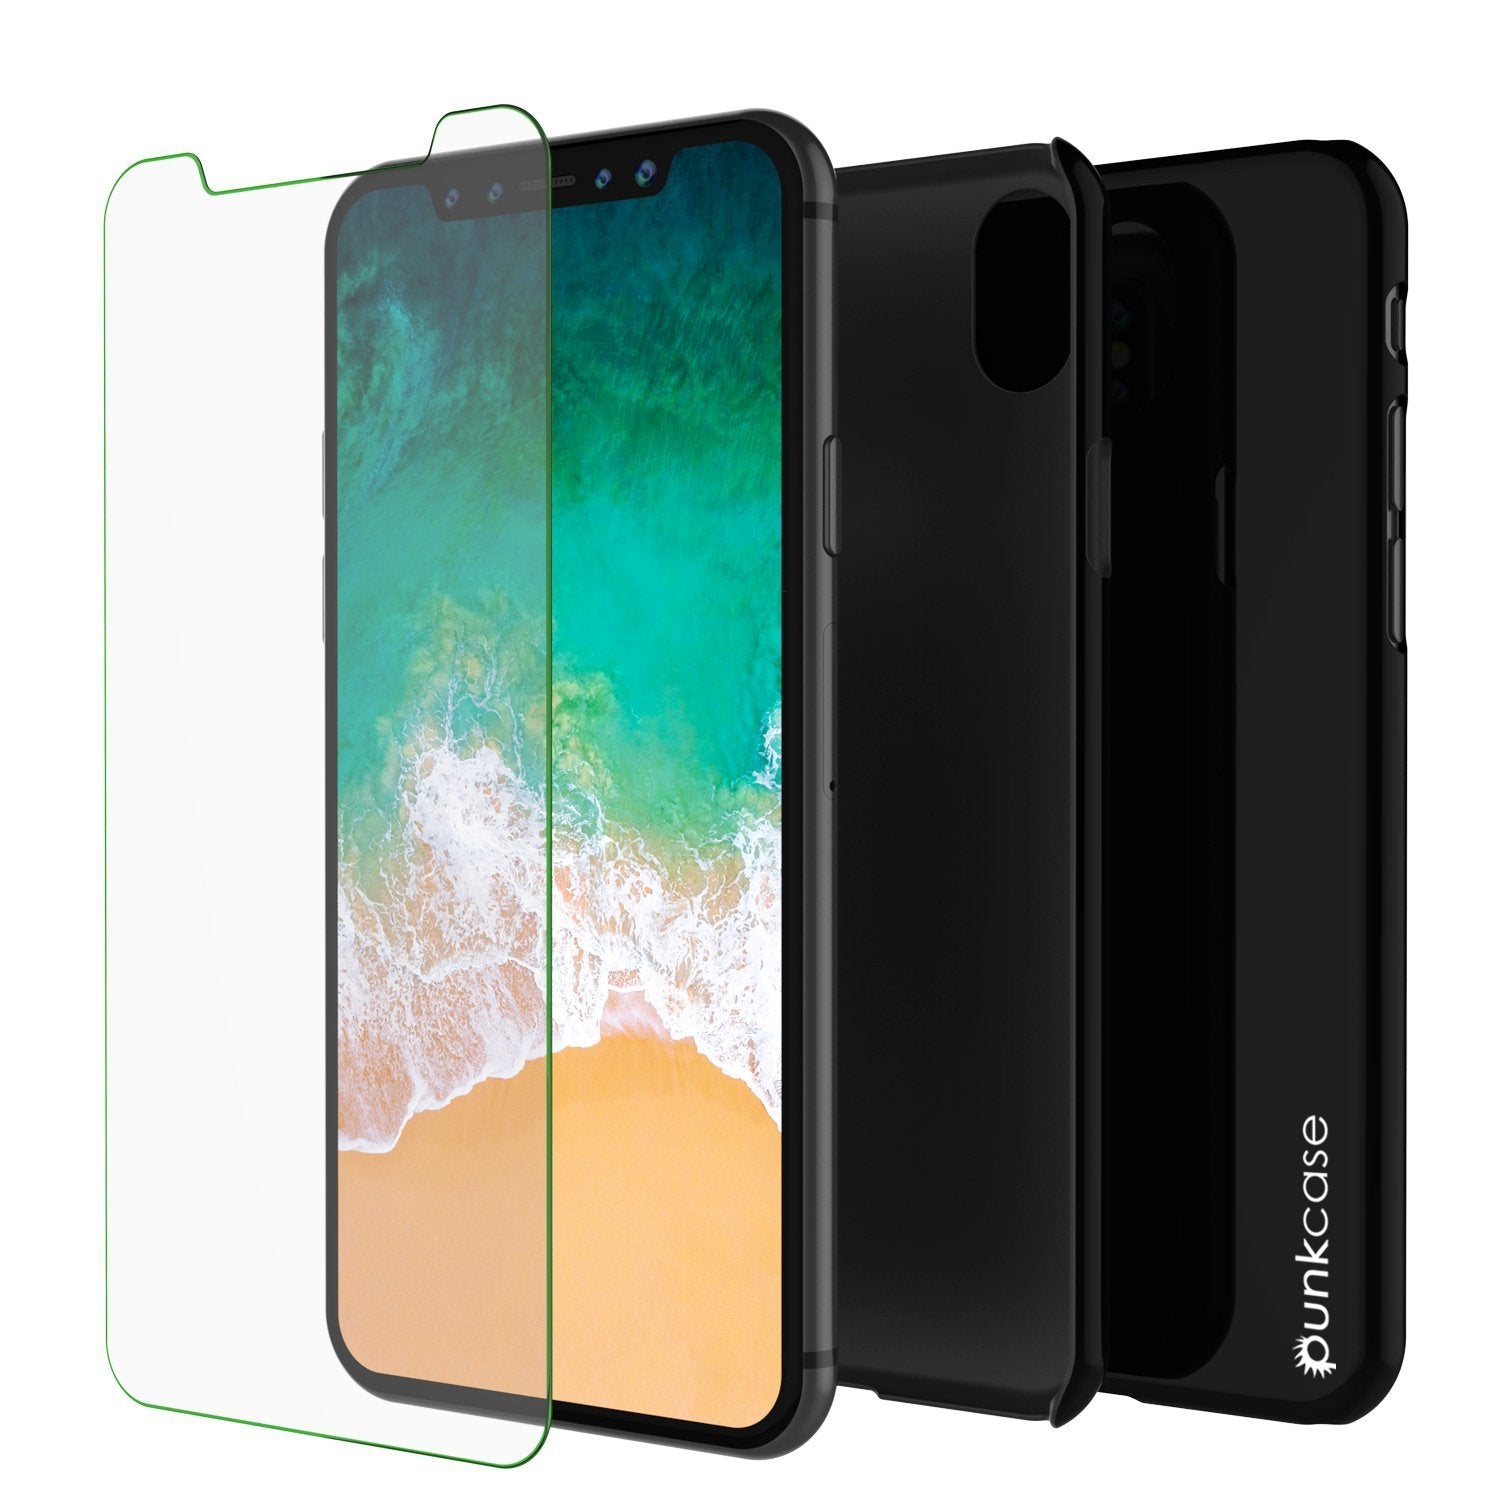 iPhone X Case Punkcase Jet black shockproof Ultra Thin Cover